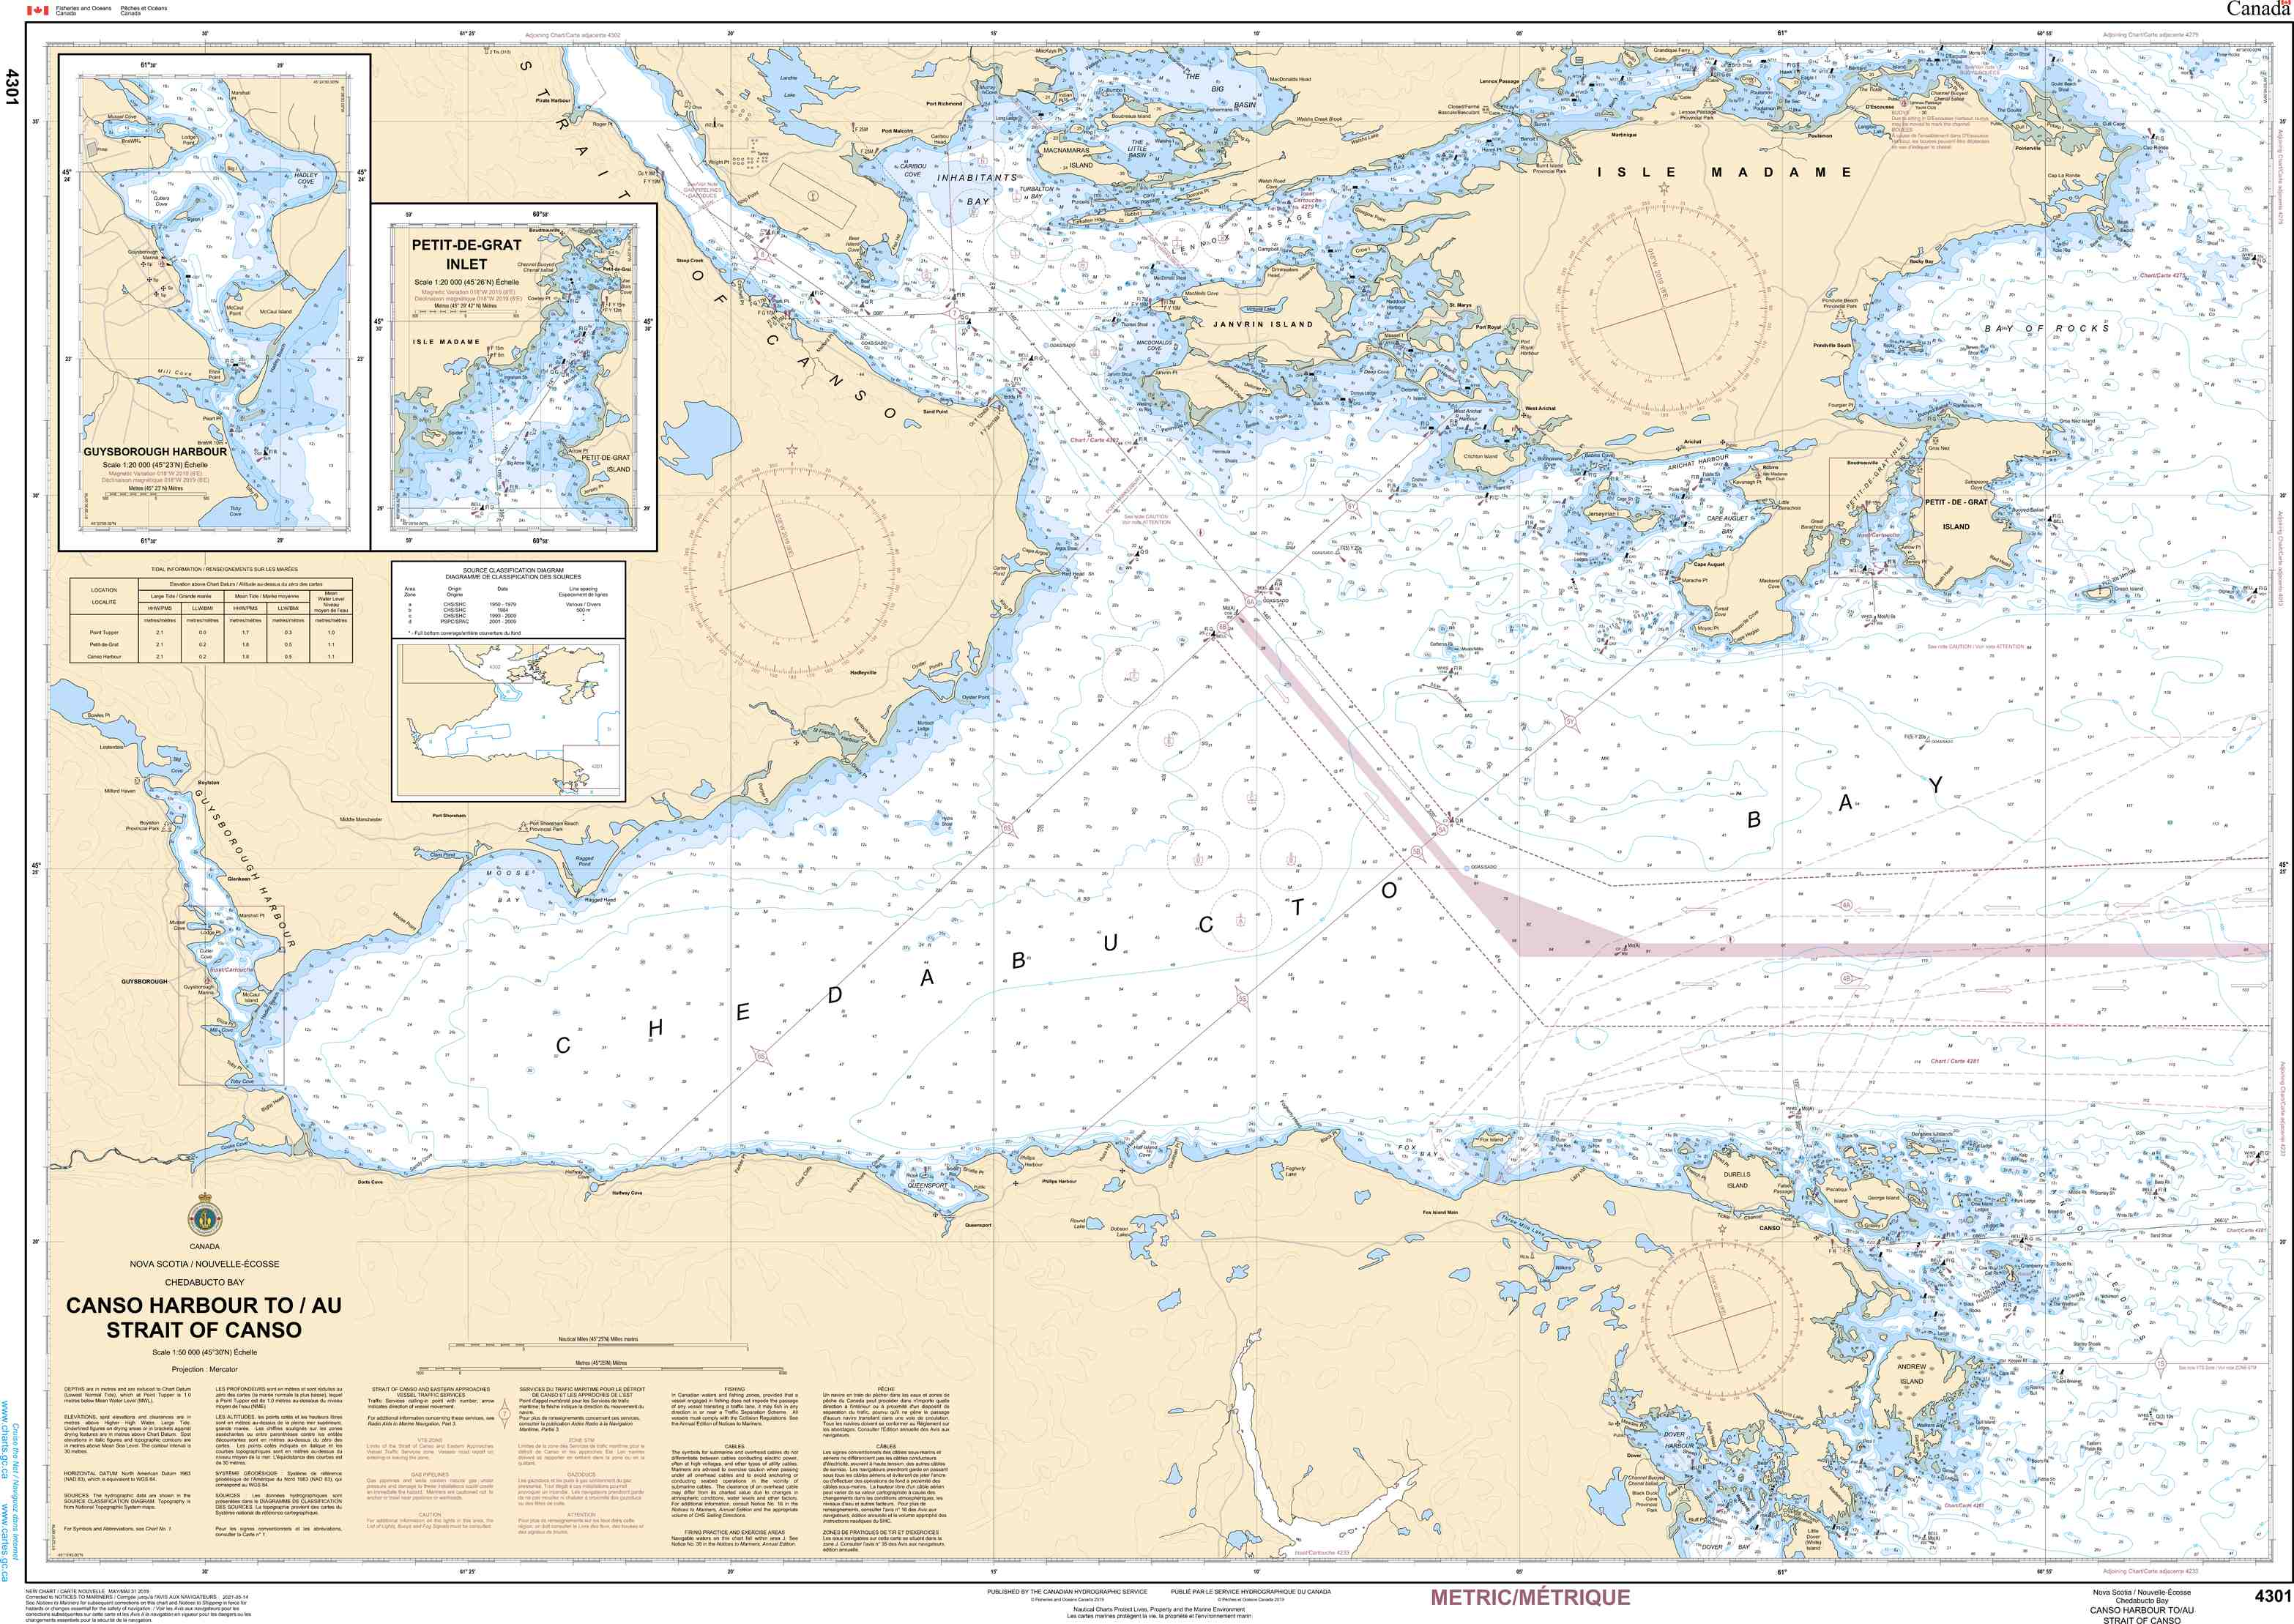 Canadian Hydrographic Service Nautical Chart CHS4301 : Chart CHSCanso Harbour To Strait Of Canso